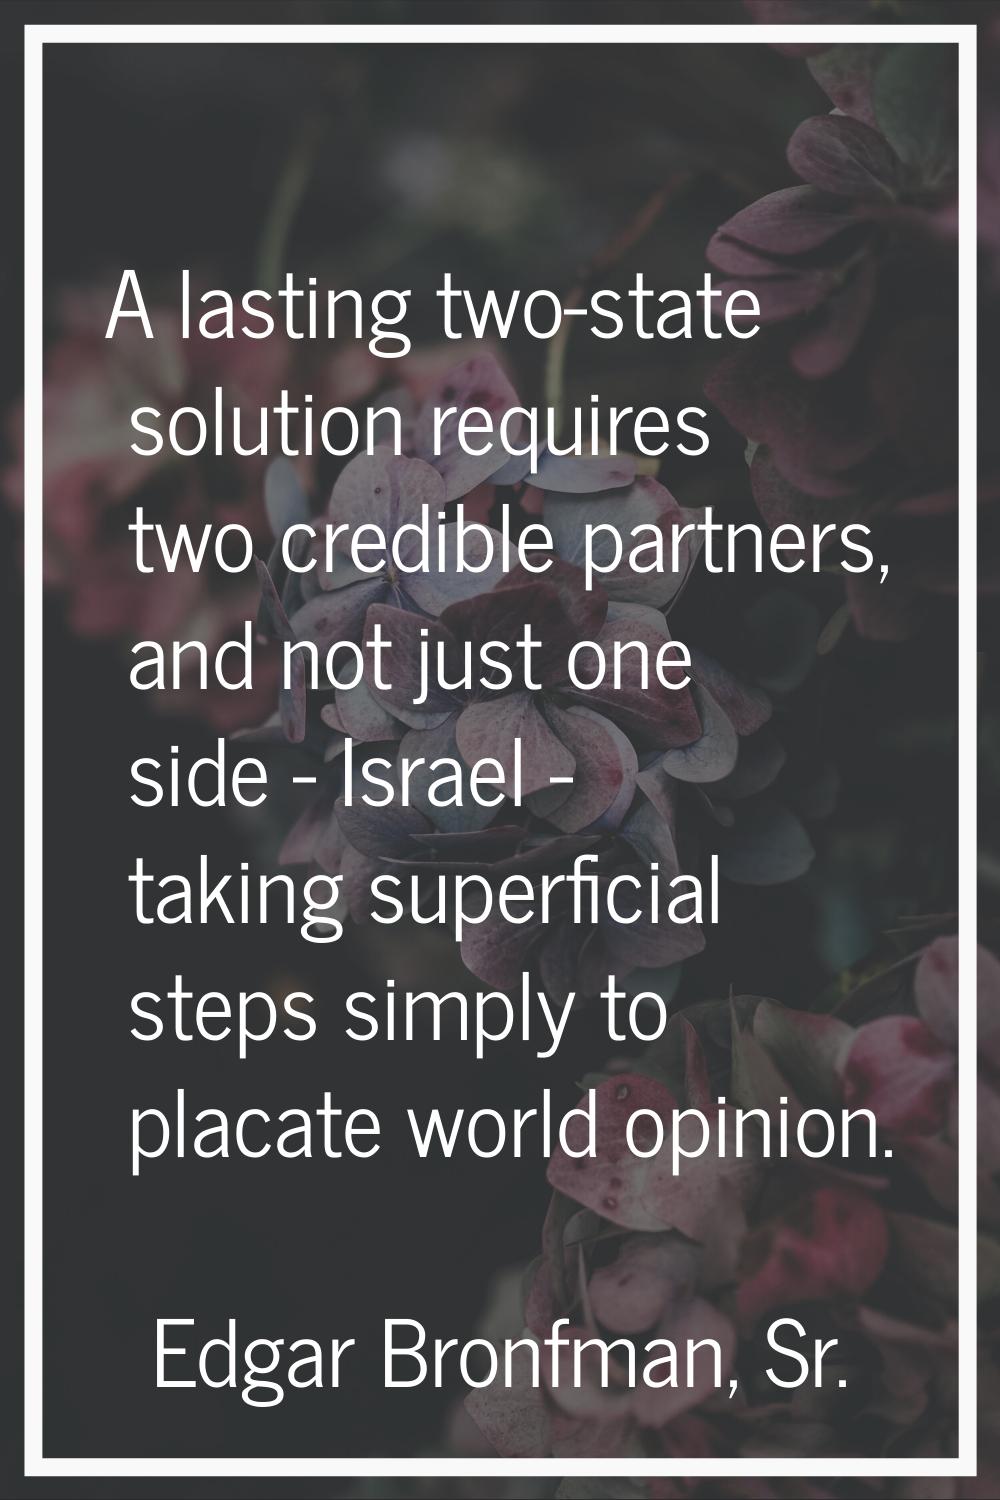 A lasting two-state solution requires two credible partners, and not just one side - Israel - takin